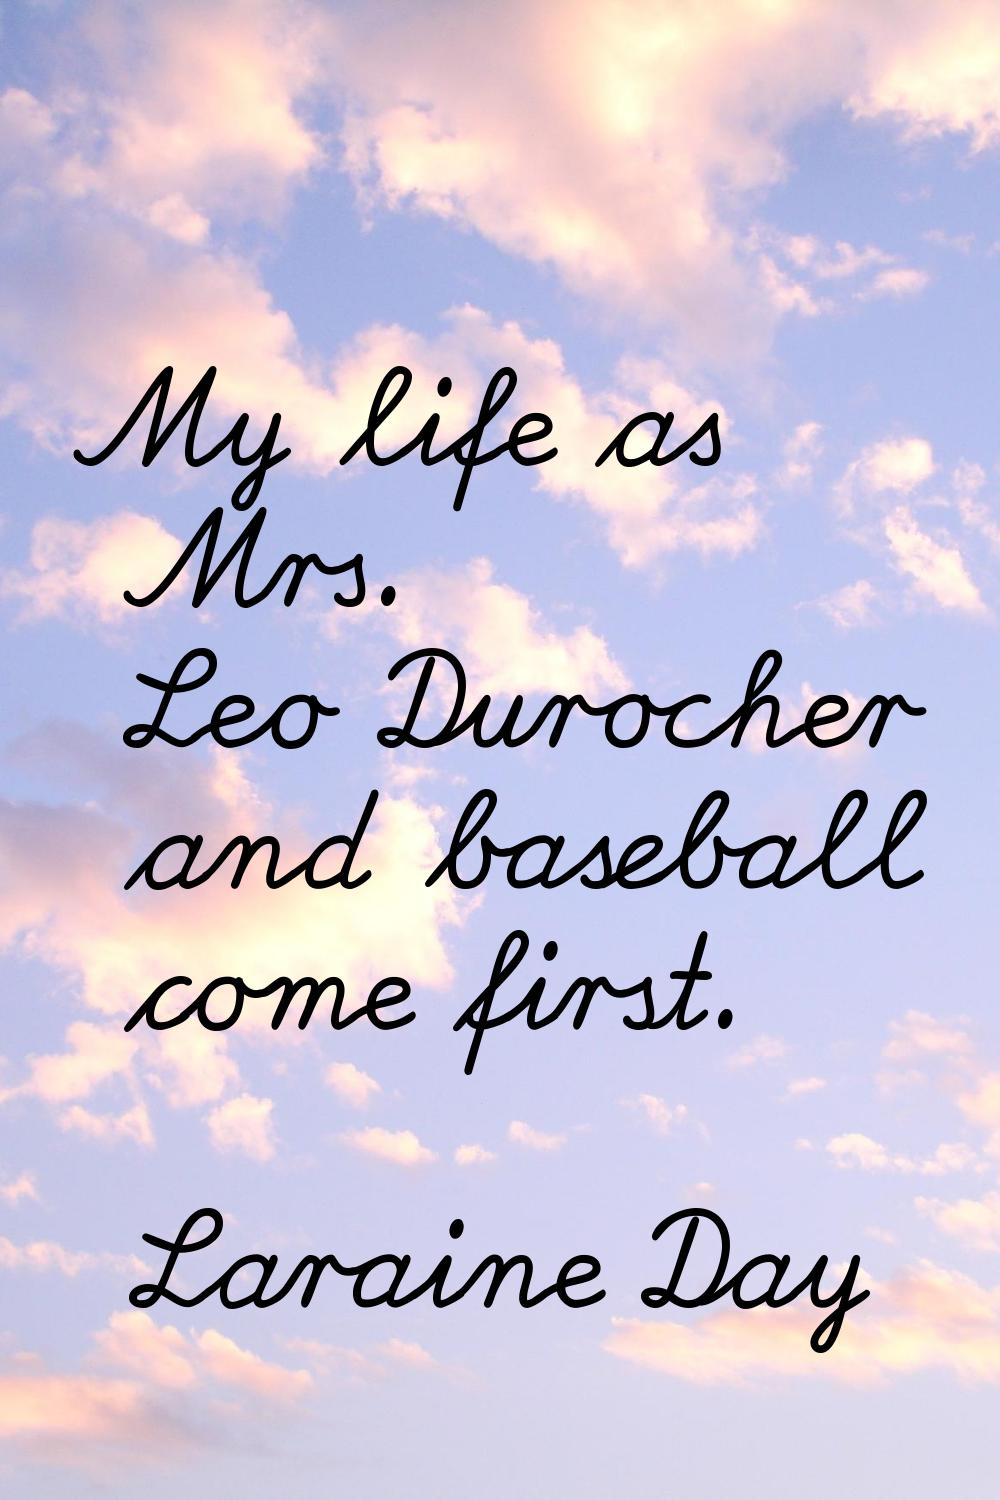 My life as Mrs. Leo Durocher and baseball come first.